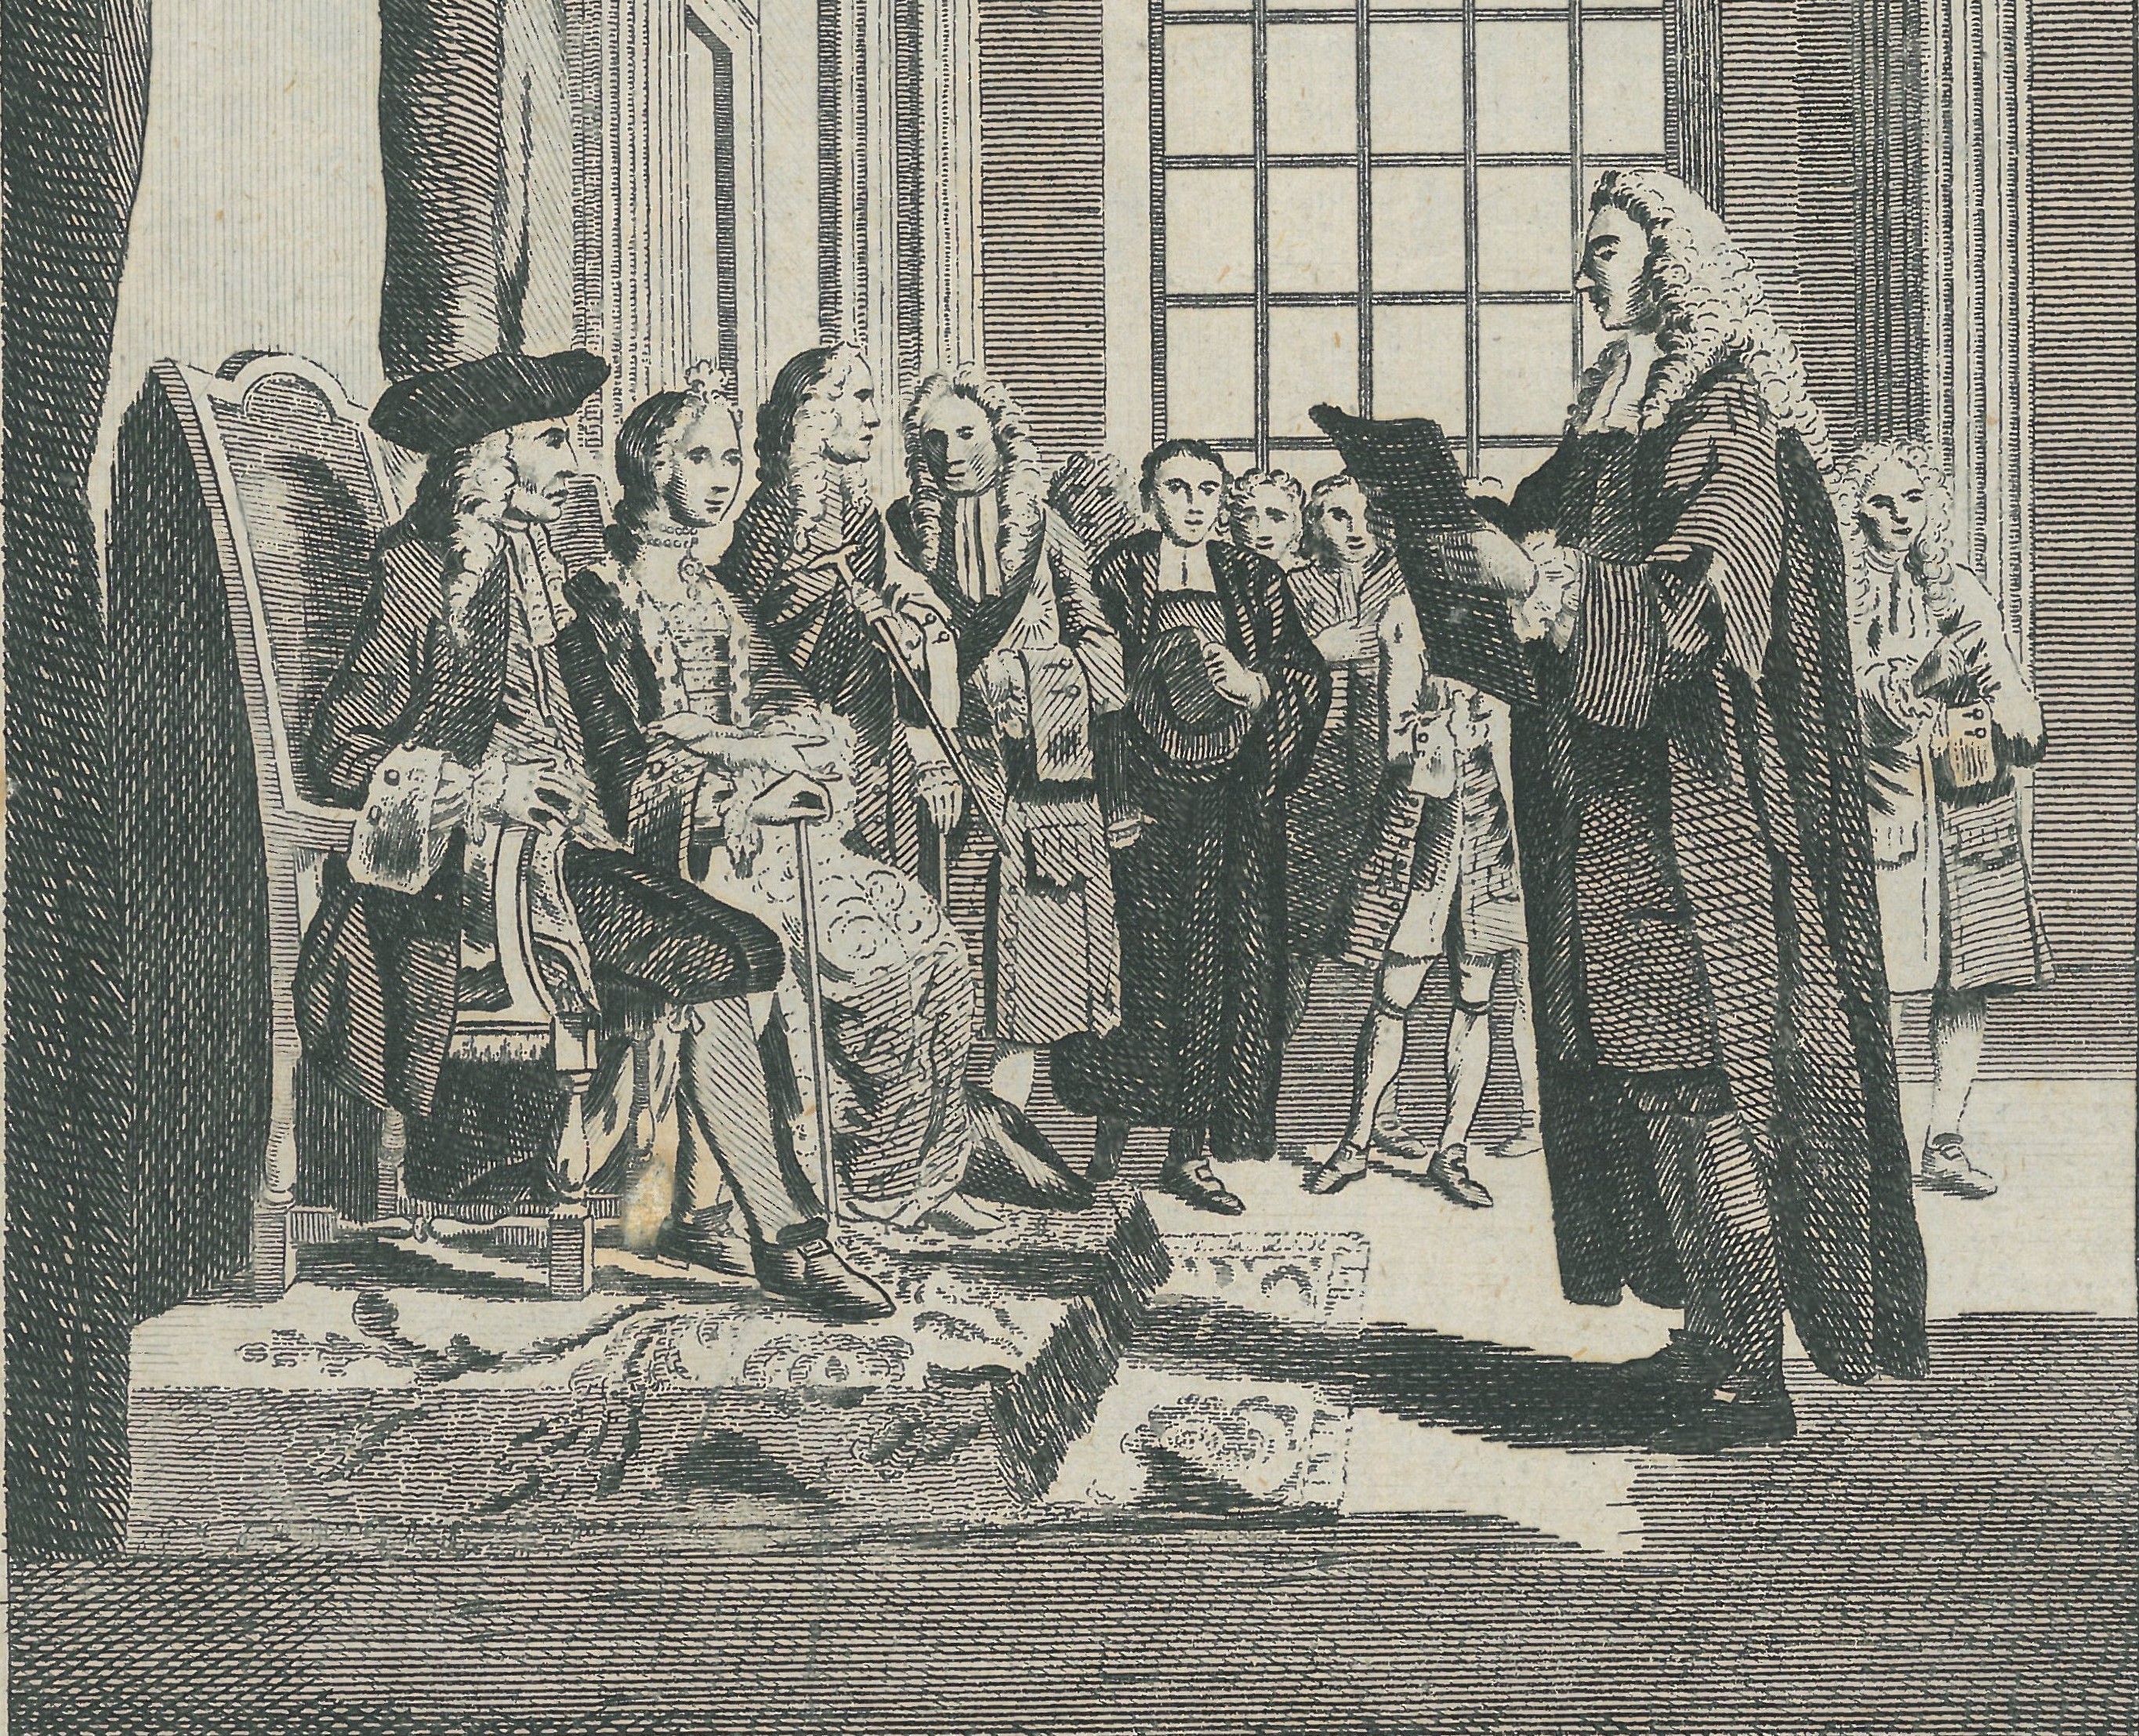 An eighteenth-century engraving of the Bill of Rights being presented to the joint monarchs William III and Mary II in 1689